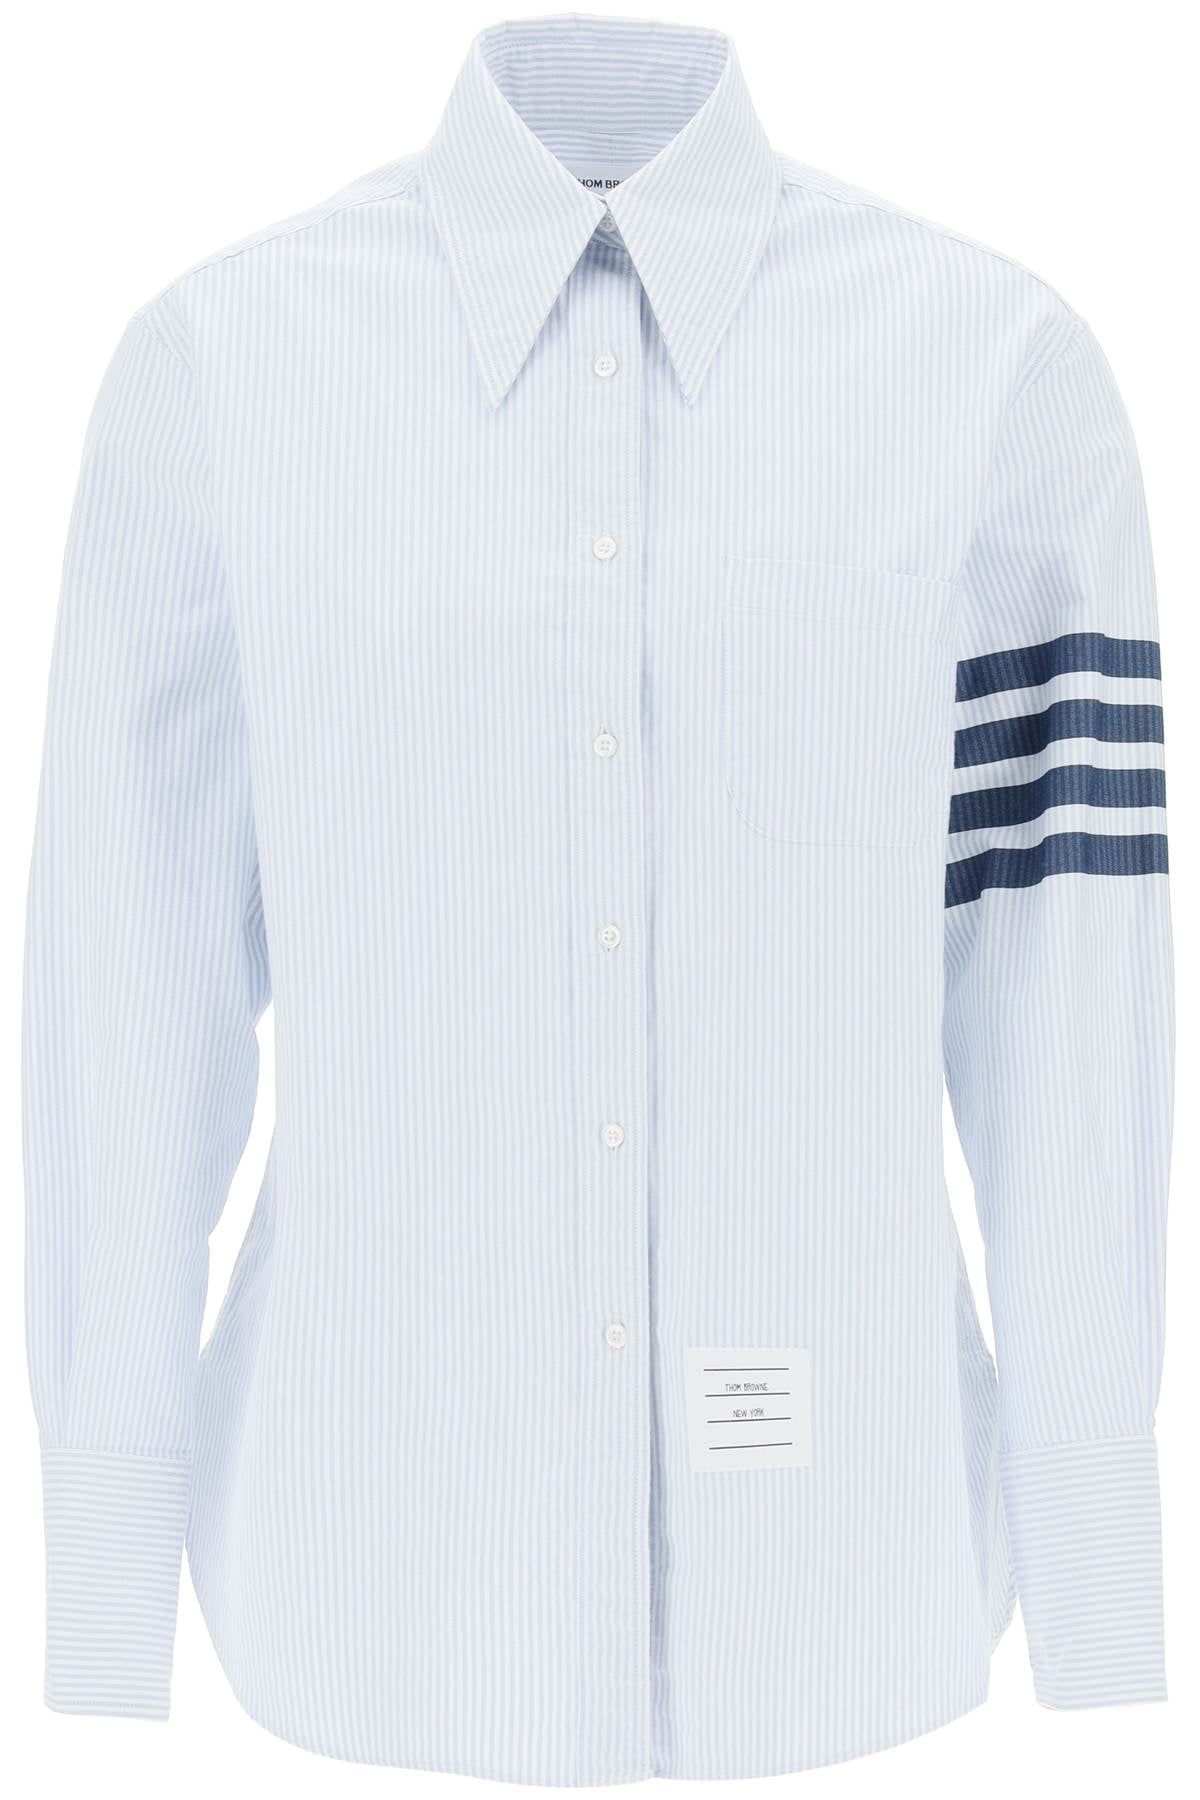 Thom Browne Striped Oxford Shirt With Pointed Collar Women - Walmart.com